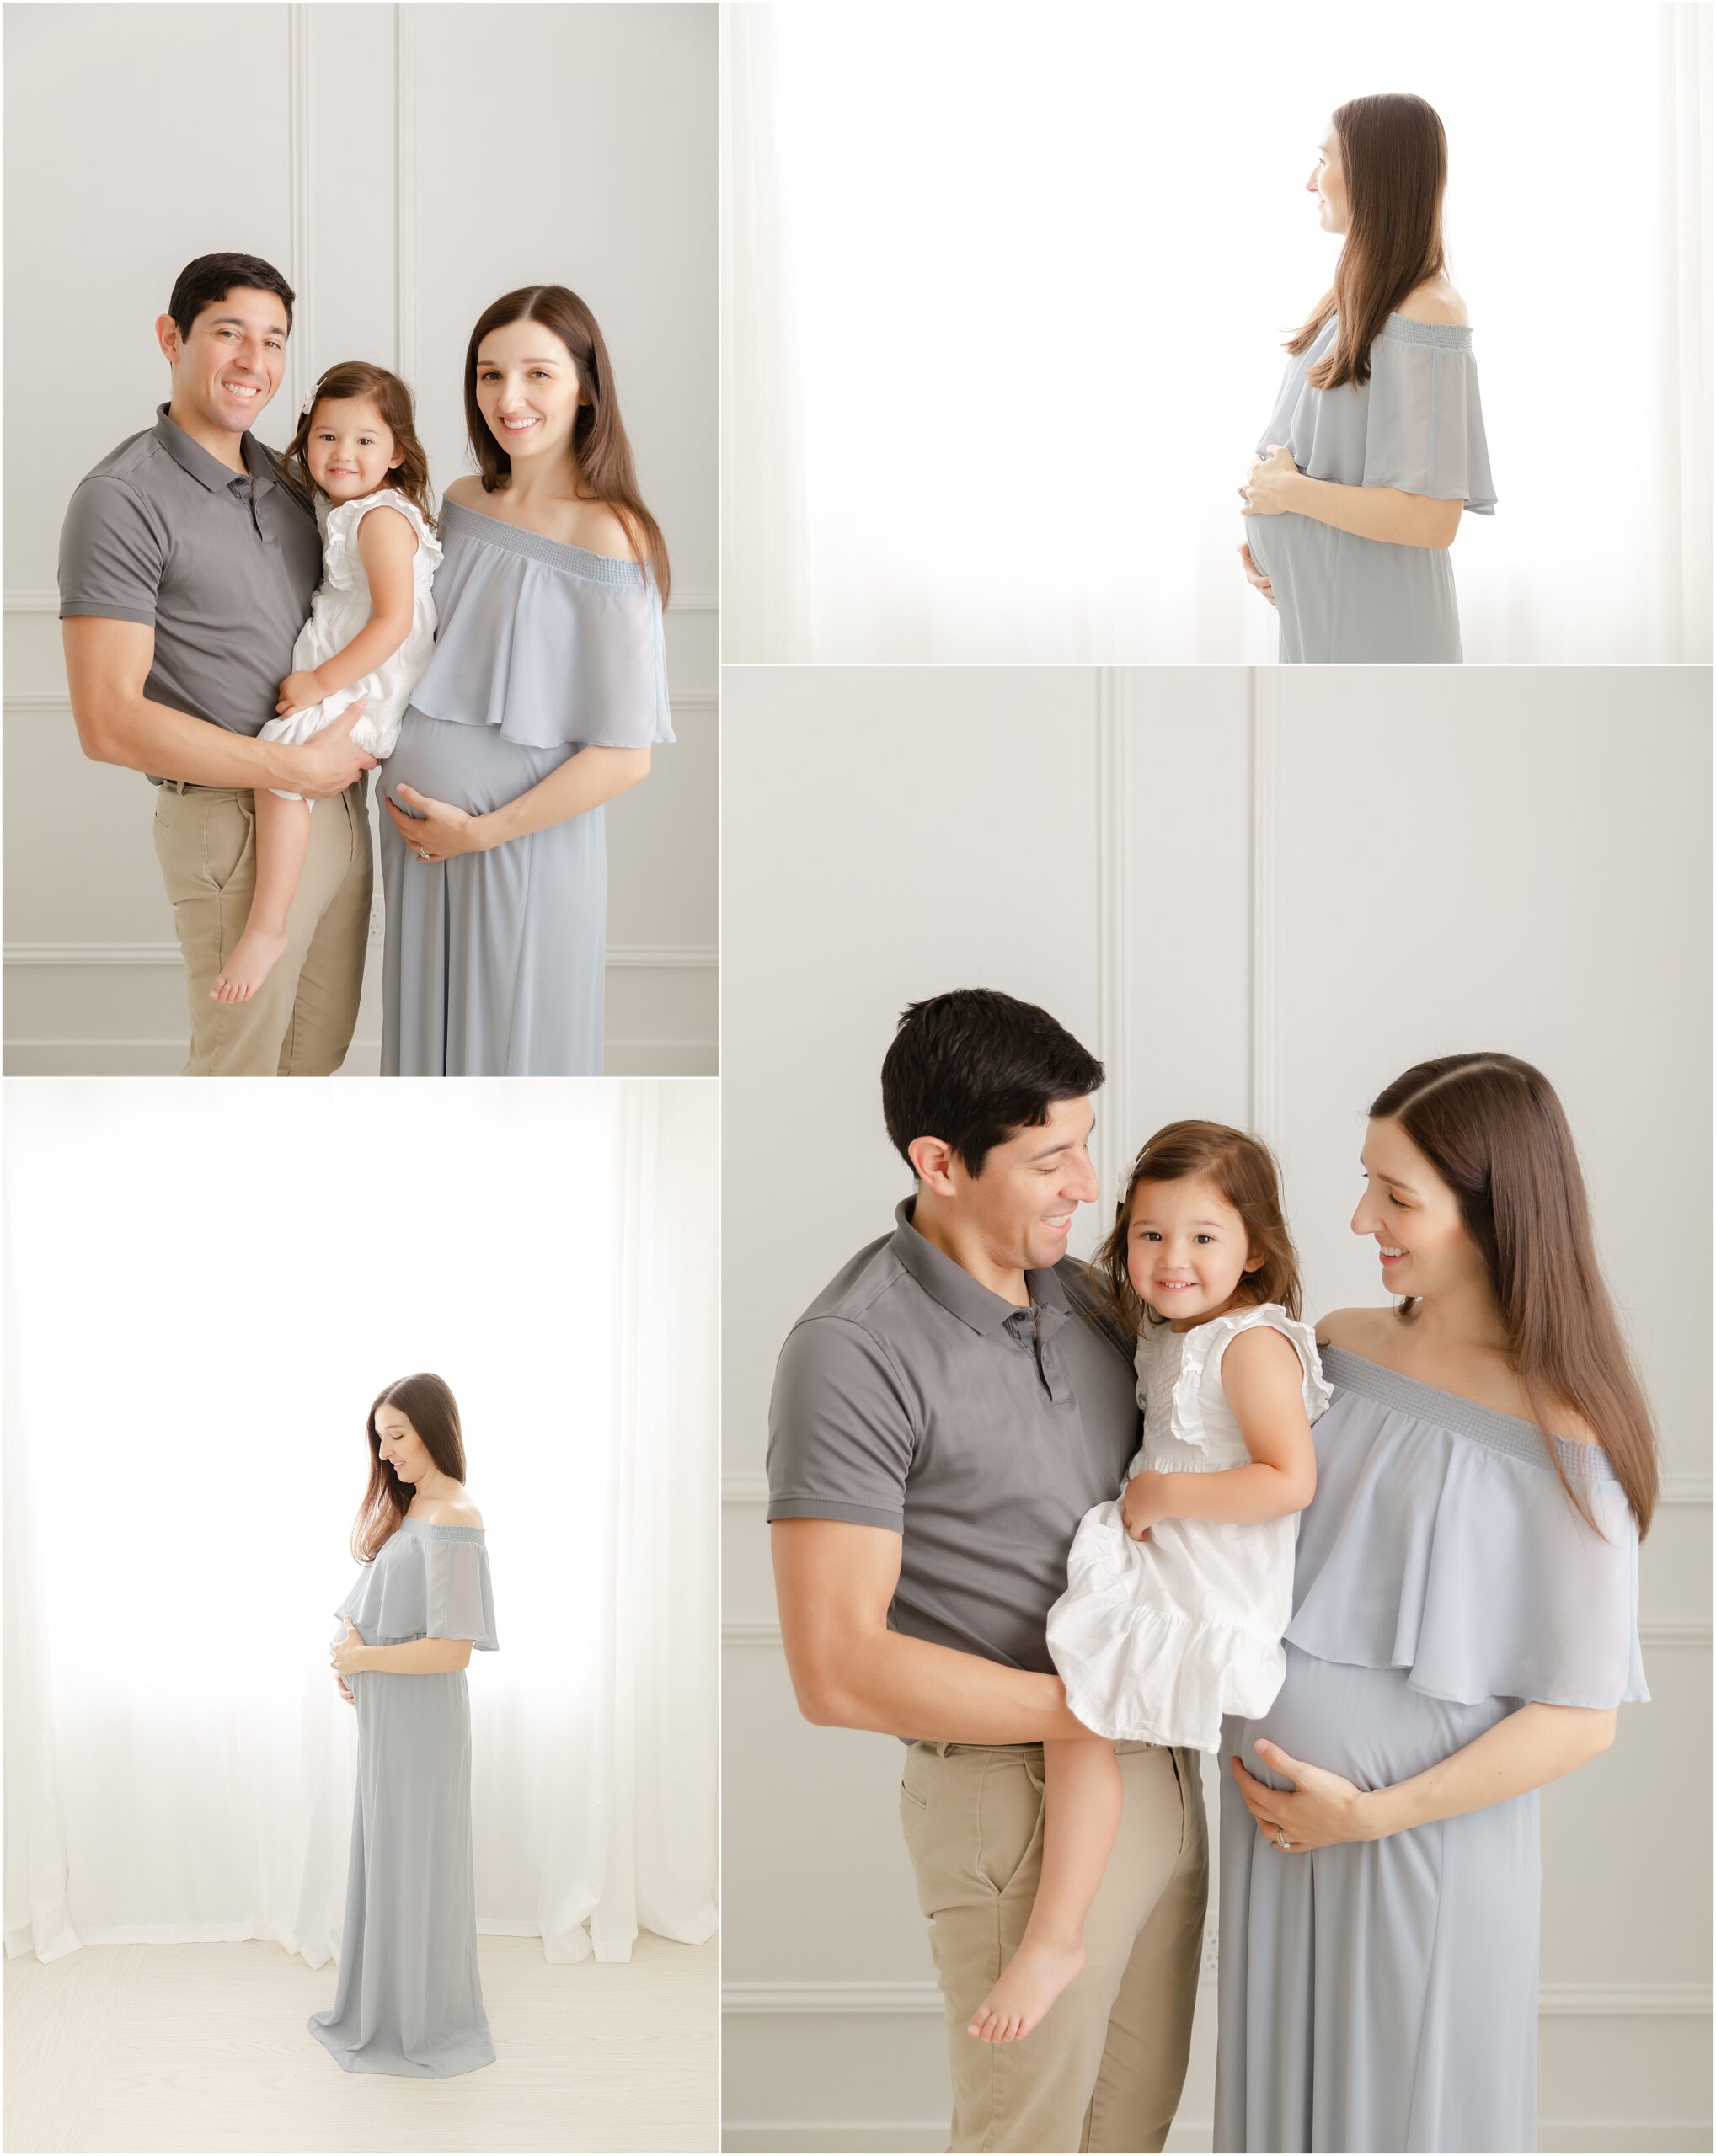 Woman wearing a long blue dress posing for maternity photos with her husband and daughter